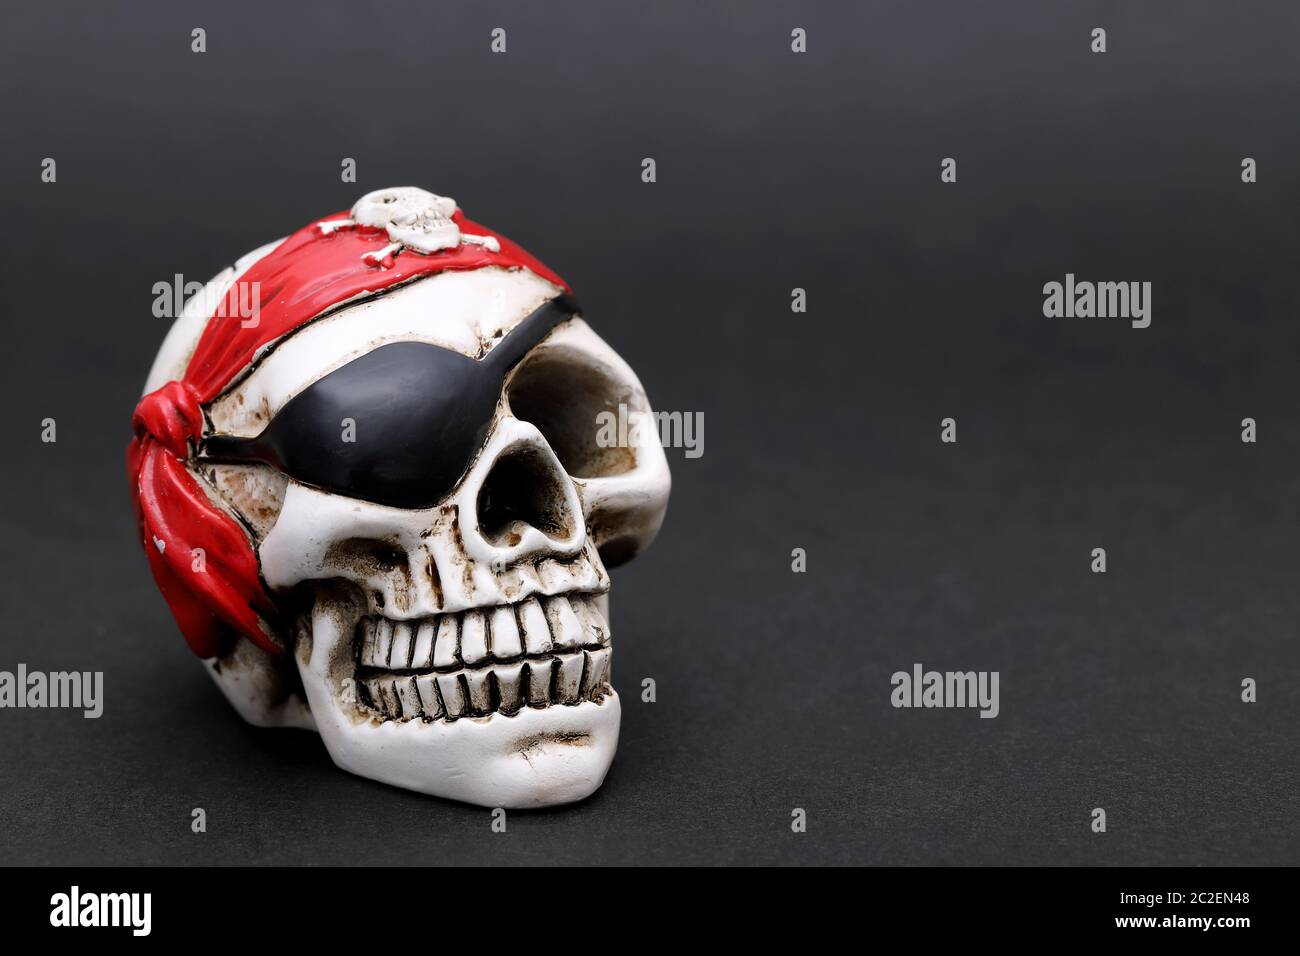 Pirate skull with red head kerchief on dark background Stock Photo